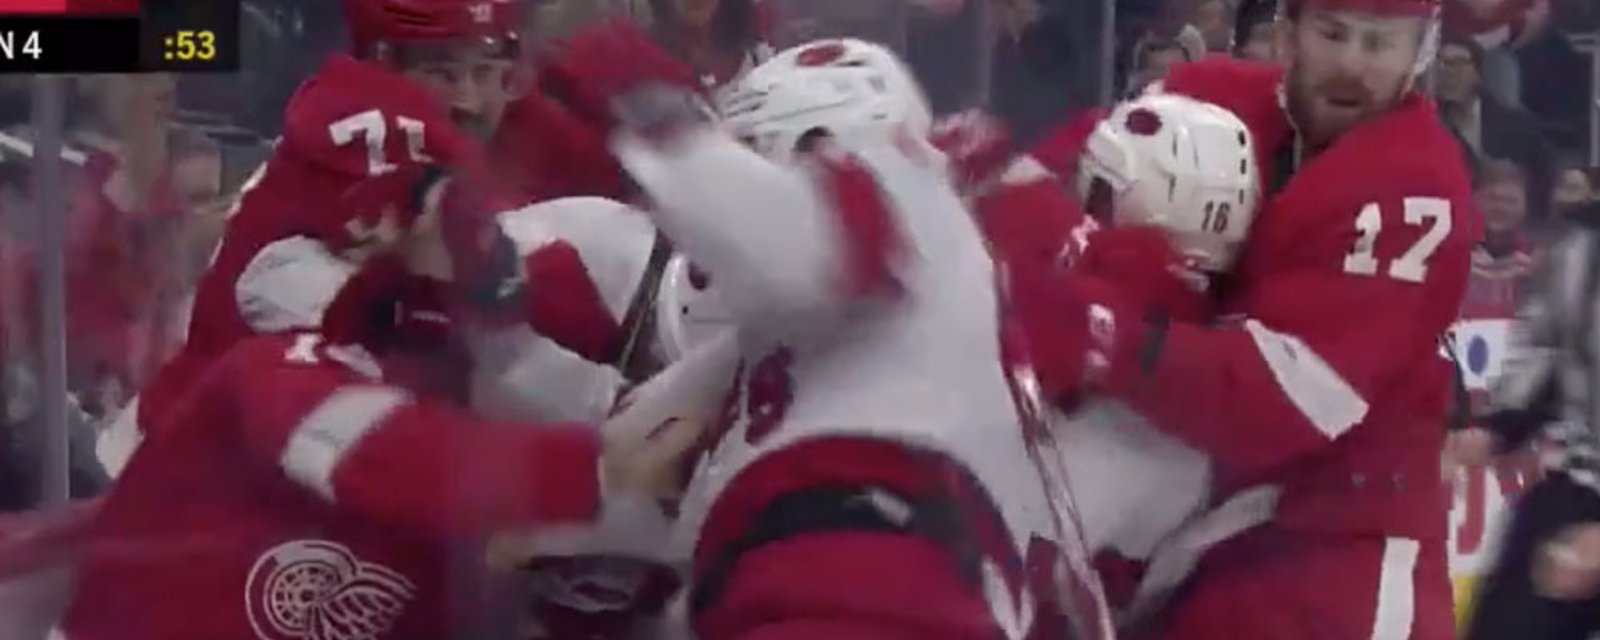 Vicious scrum breaks out in Detroit all because of goalie Mrazek